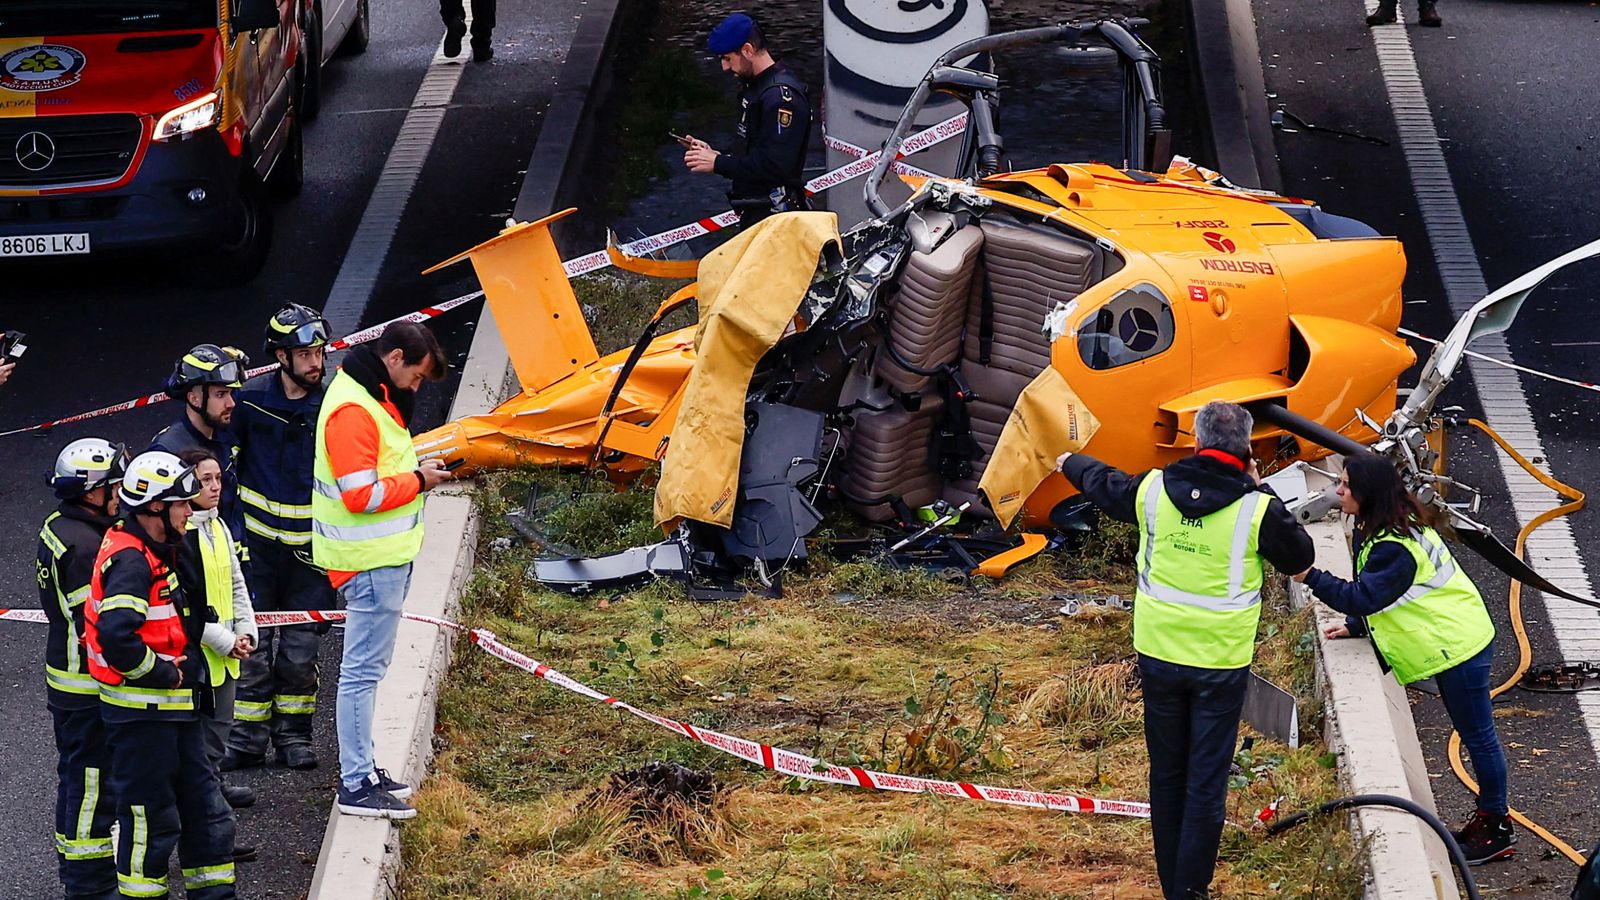 Madrid: Helicopter hits car after crashing on motorway ring road